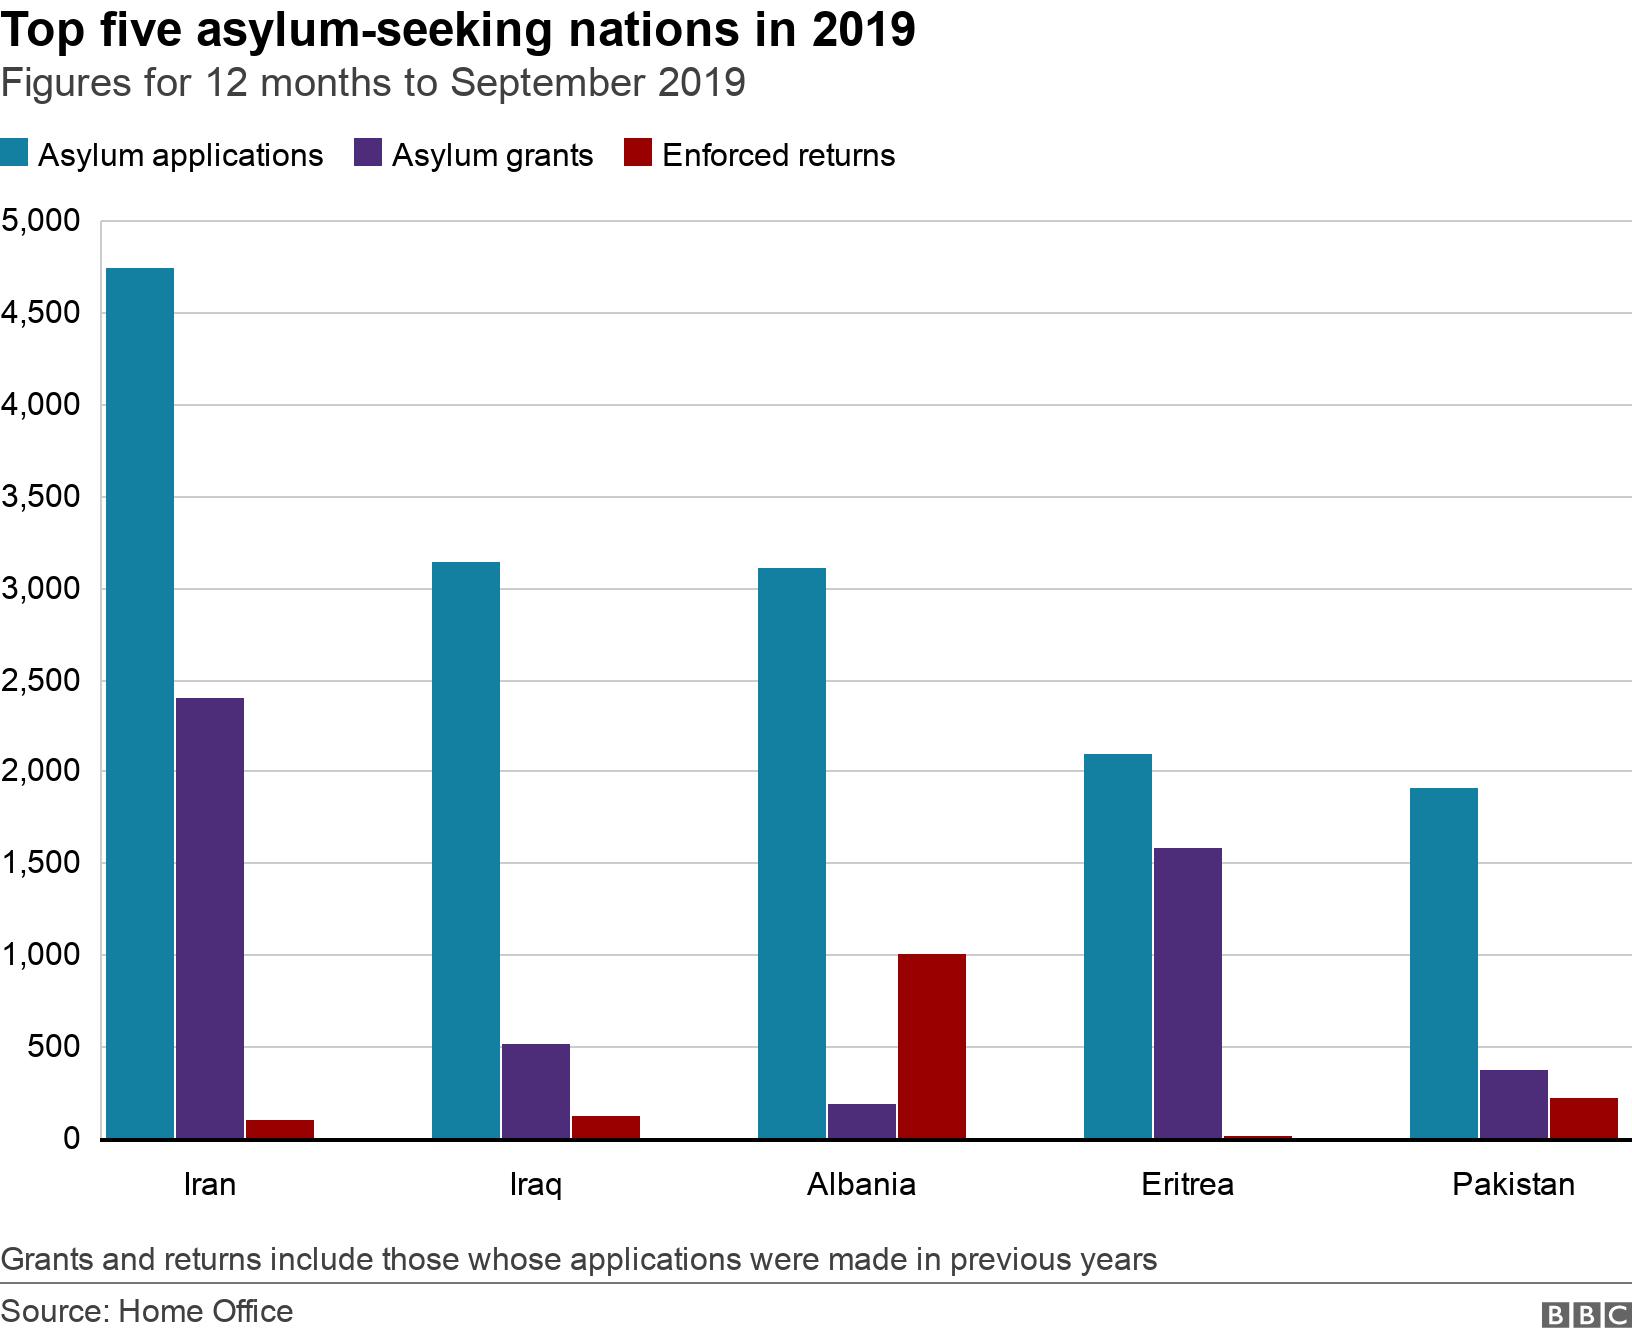 Top five asylum-seeking nations in 2019. Figures for 12 months to September 2019. Asylum applications, asylum grants and enforced returns of the top five asylum-seeking nations in the year to September 2019.   Grants and returns include those whose applications were made in previous years.